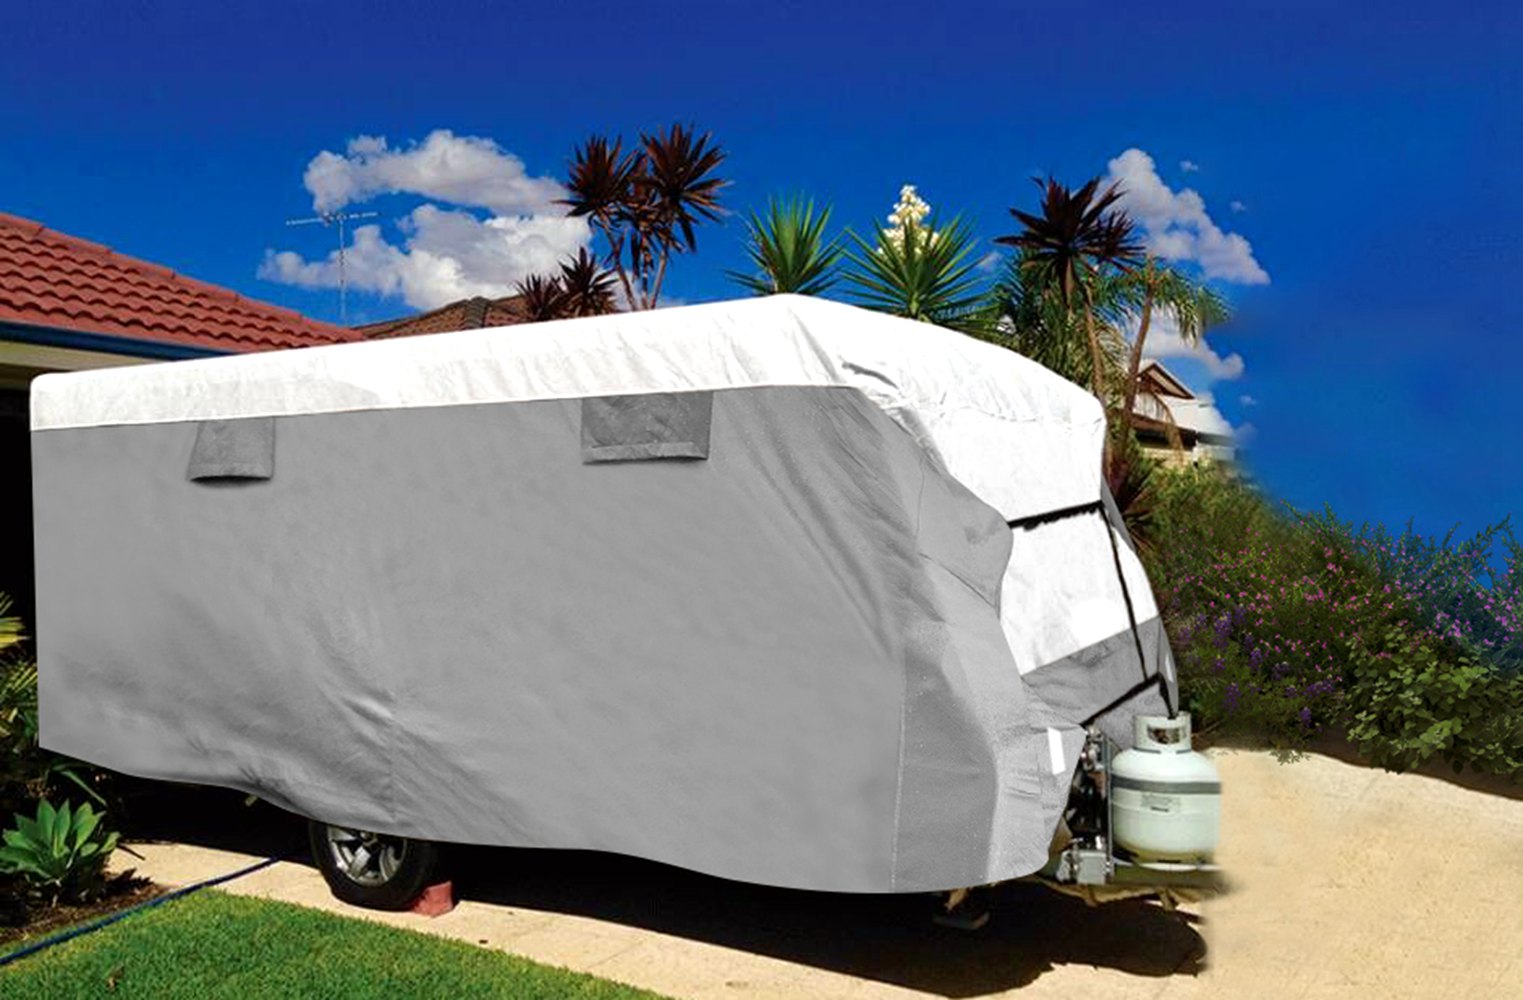 Roof Tyvek and Sides Polypropylene RV Covers